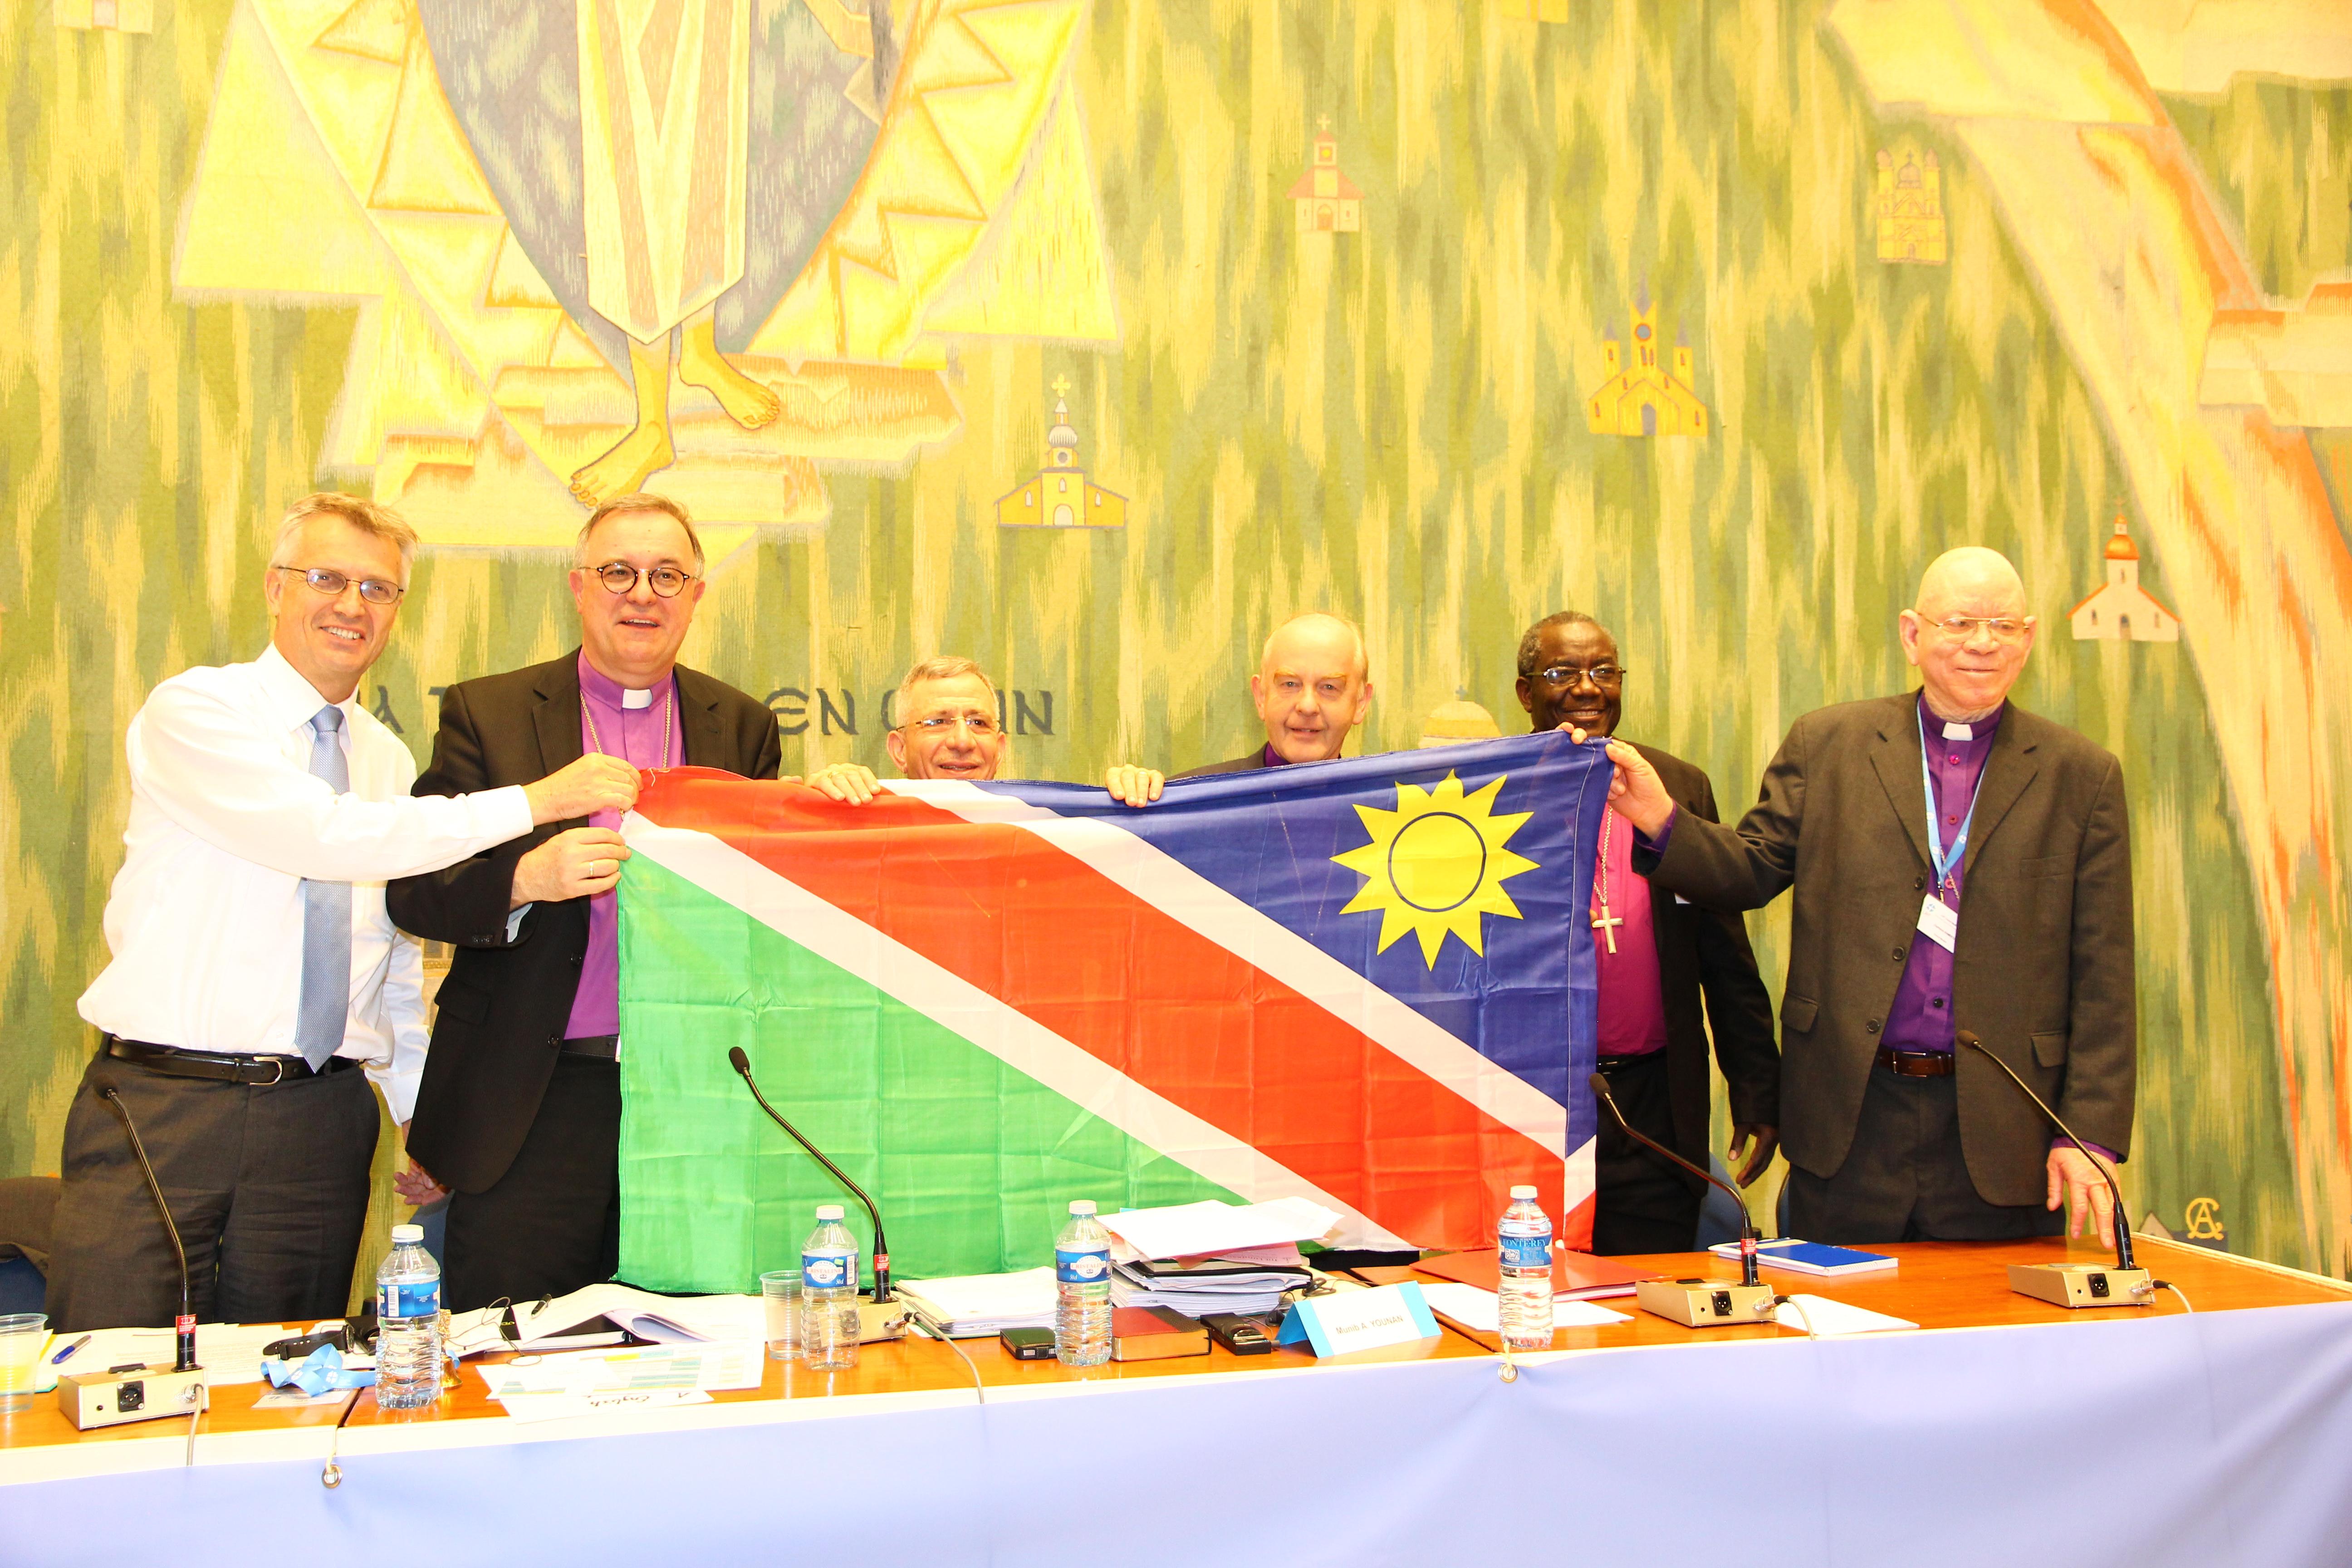 LWF member churches in Namibia will host the 2017 Assembly Â© LWF/M. Haas